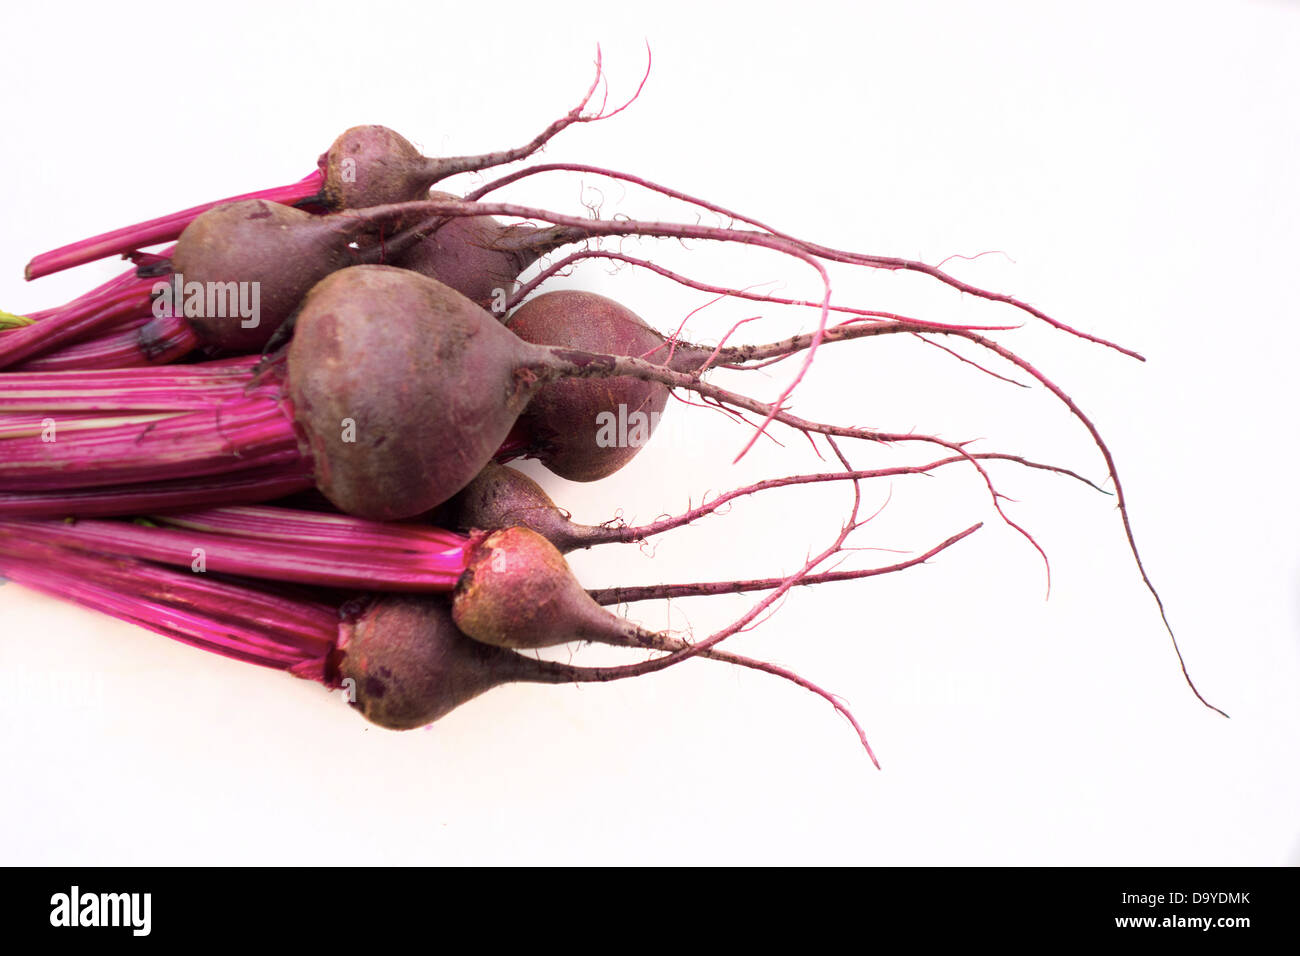 red beets Stock Photo